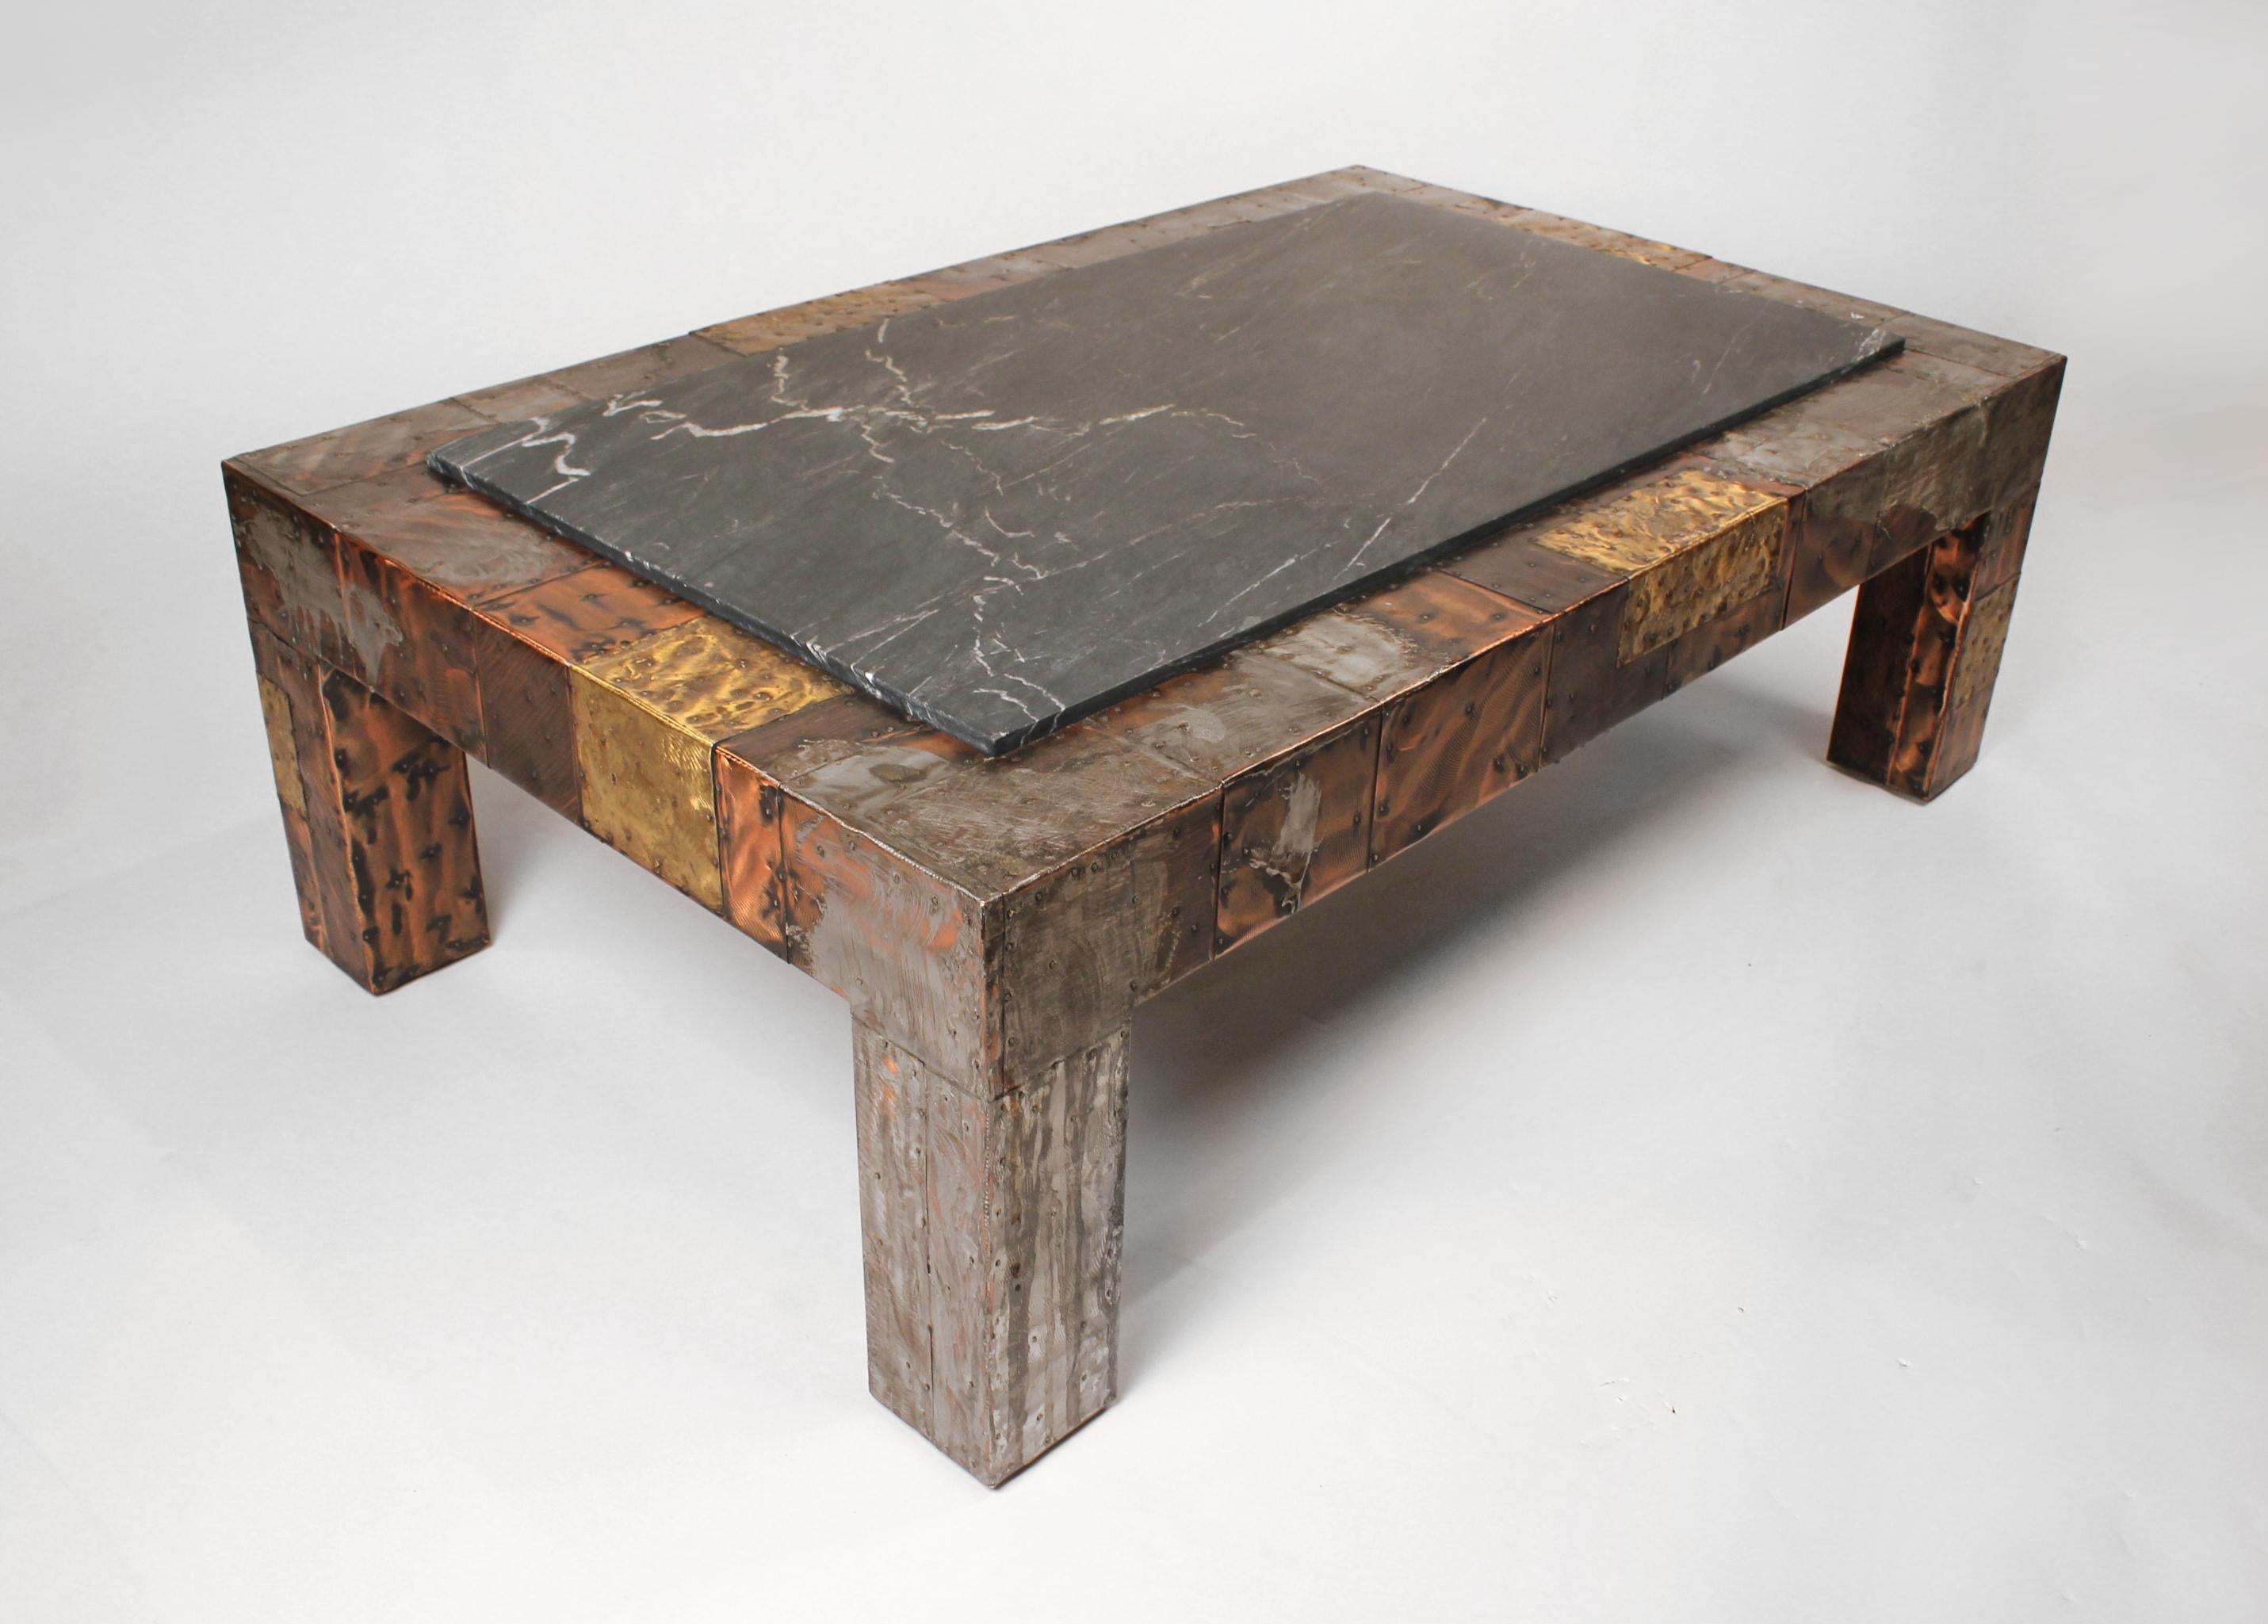 1960s Paul Evans patchwork coffee table for Directional. The slate top on this example has a honed finish and a very subtle veining.